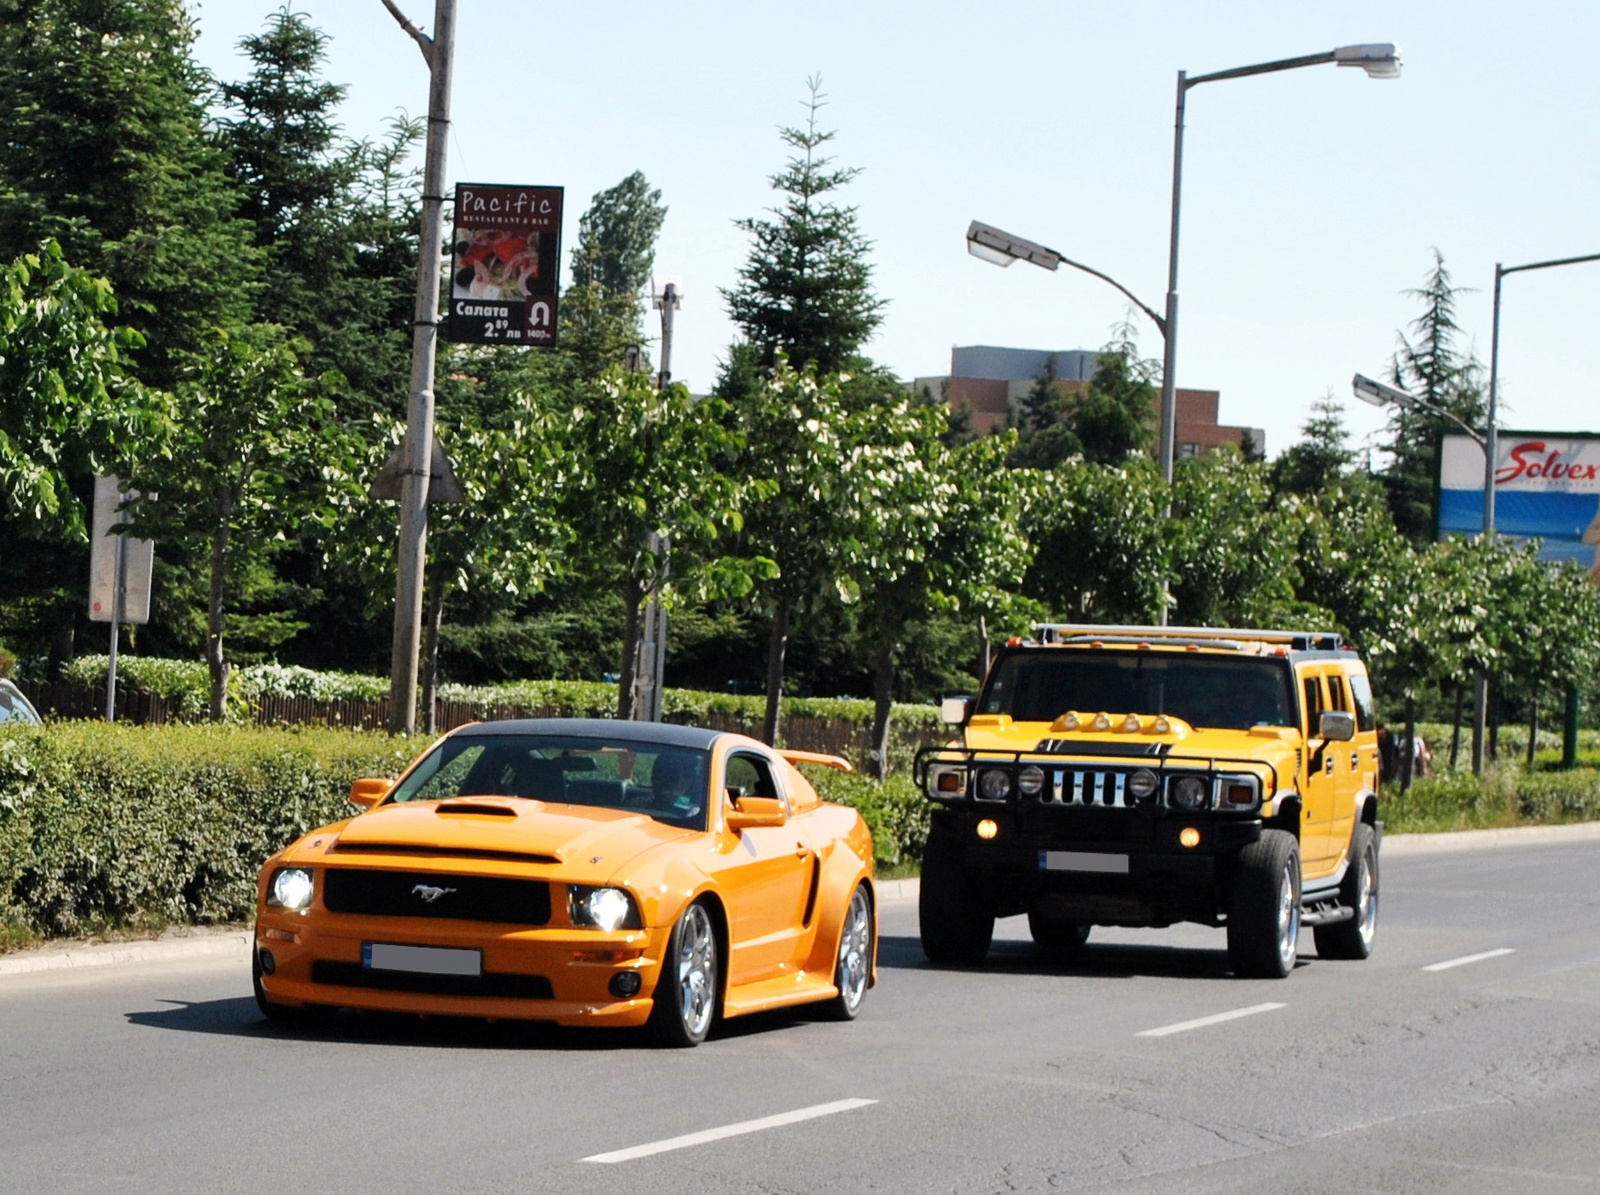 Ford Mustang GT & Hummer H2